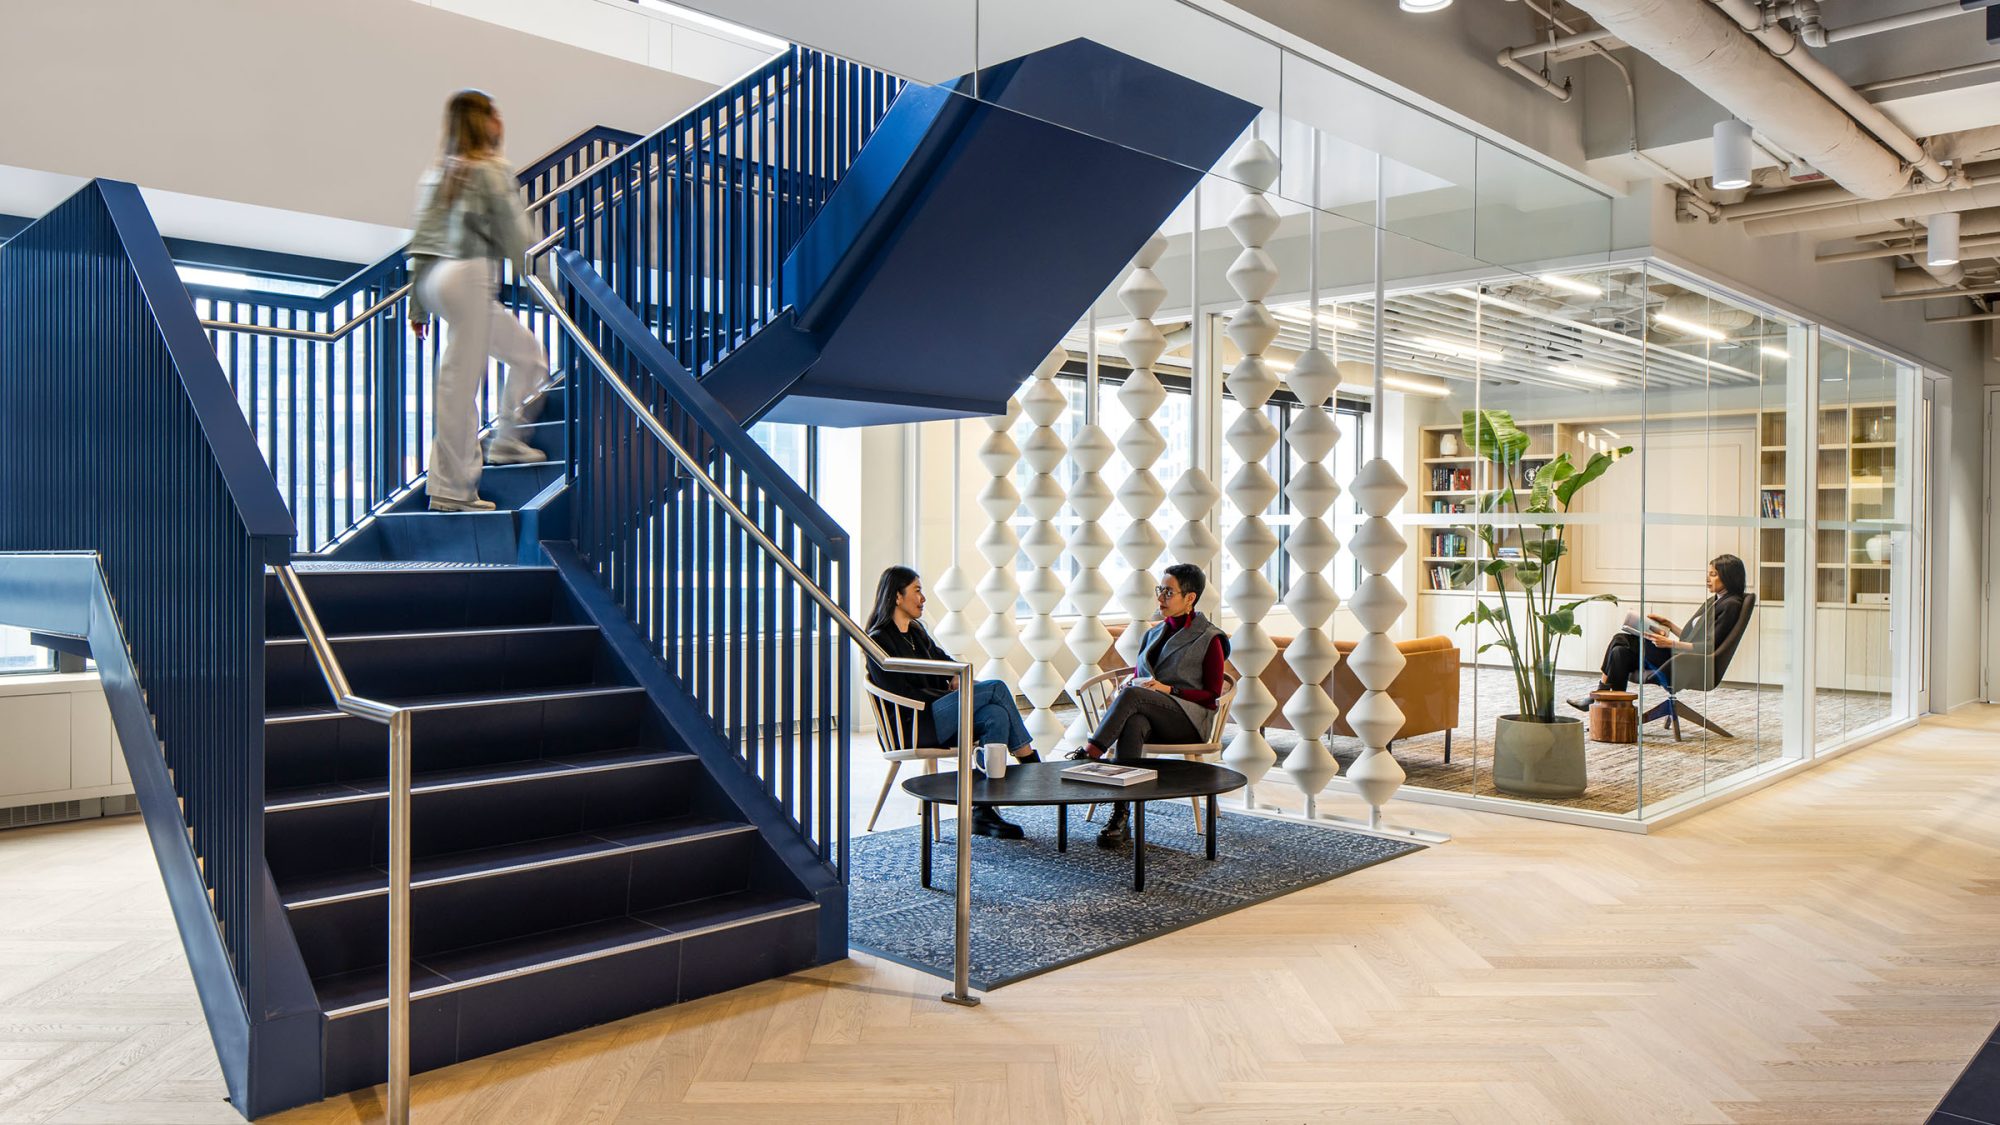 Office design for Tipalti in Vancouver by M Moser Associates featuring a repurposed staircase and enjoyable employee experience.